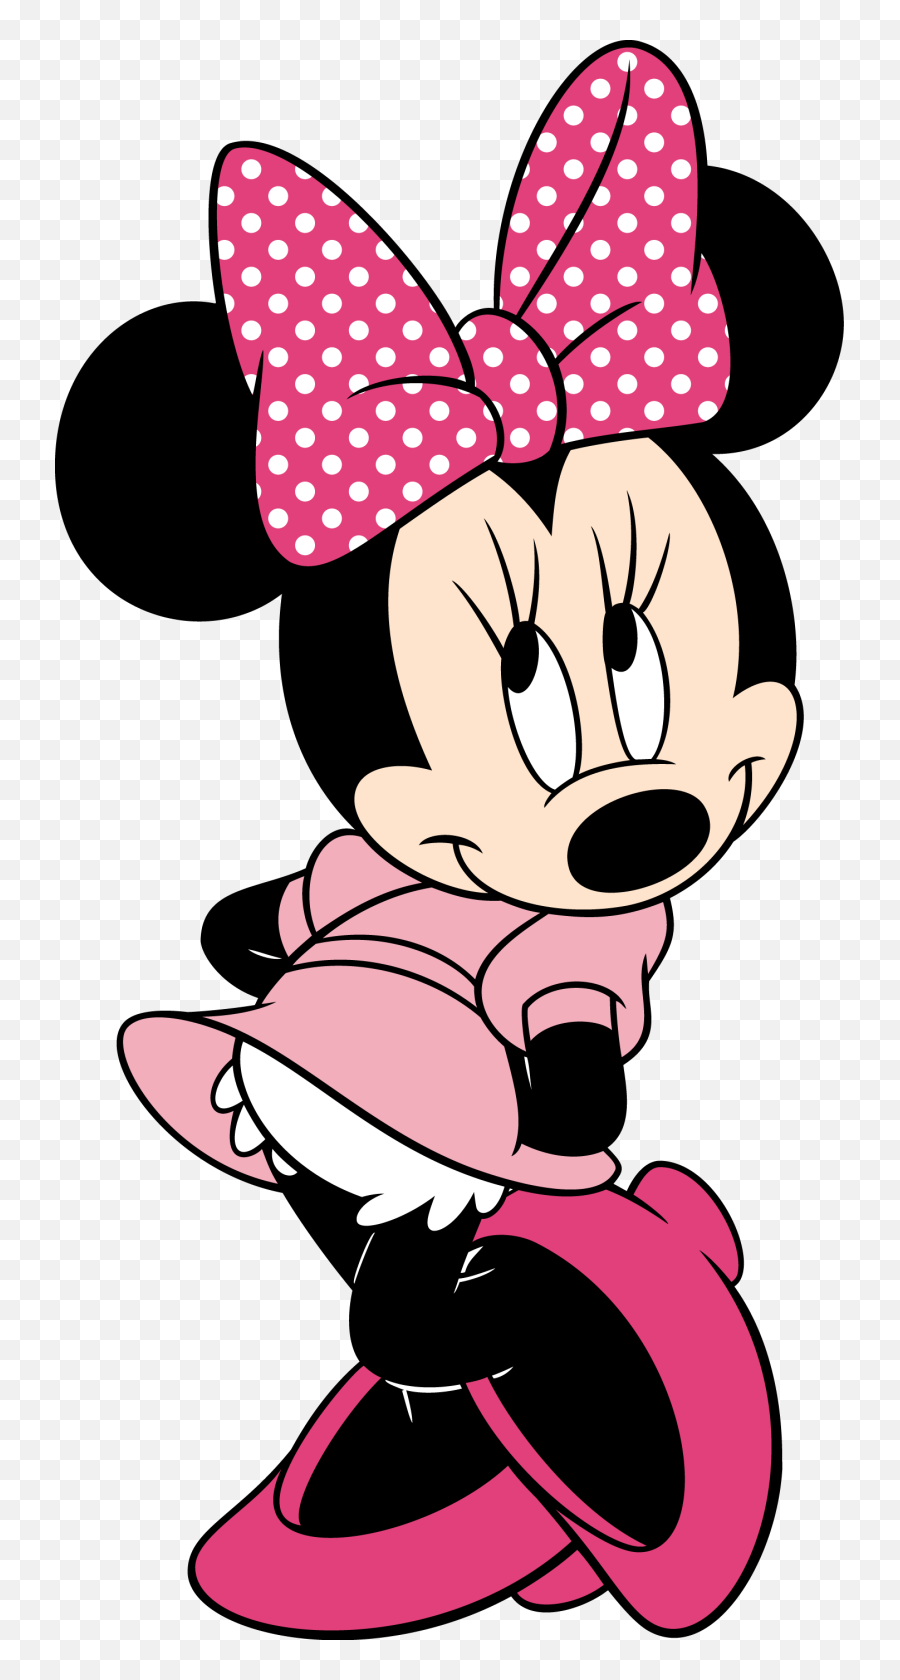 Free Printable Minnie Mouse Images PRINTABLE TEMPLATES